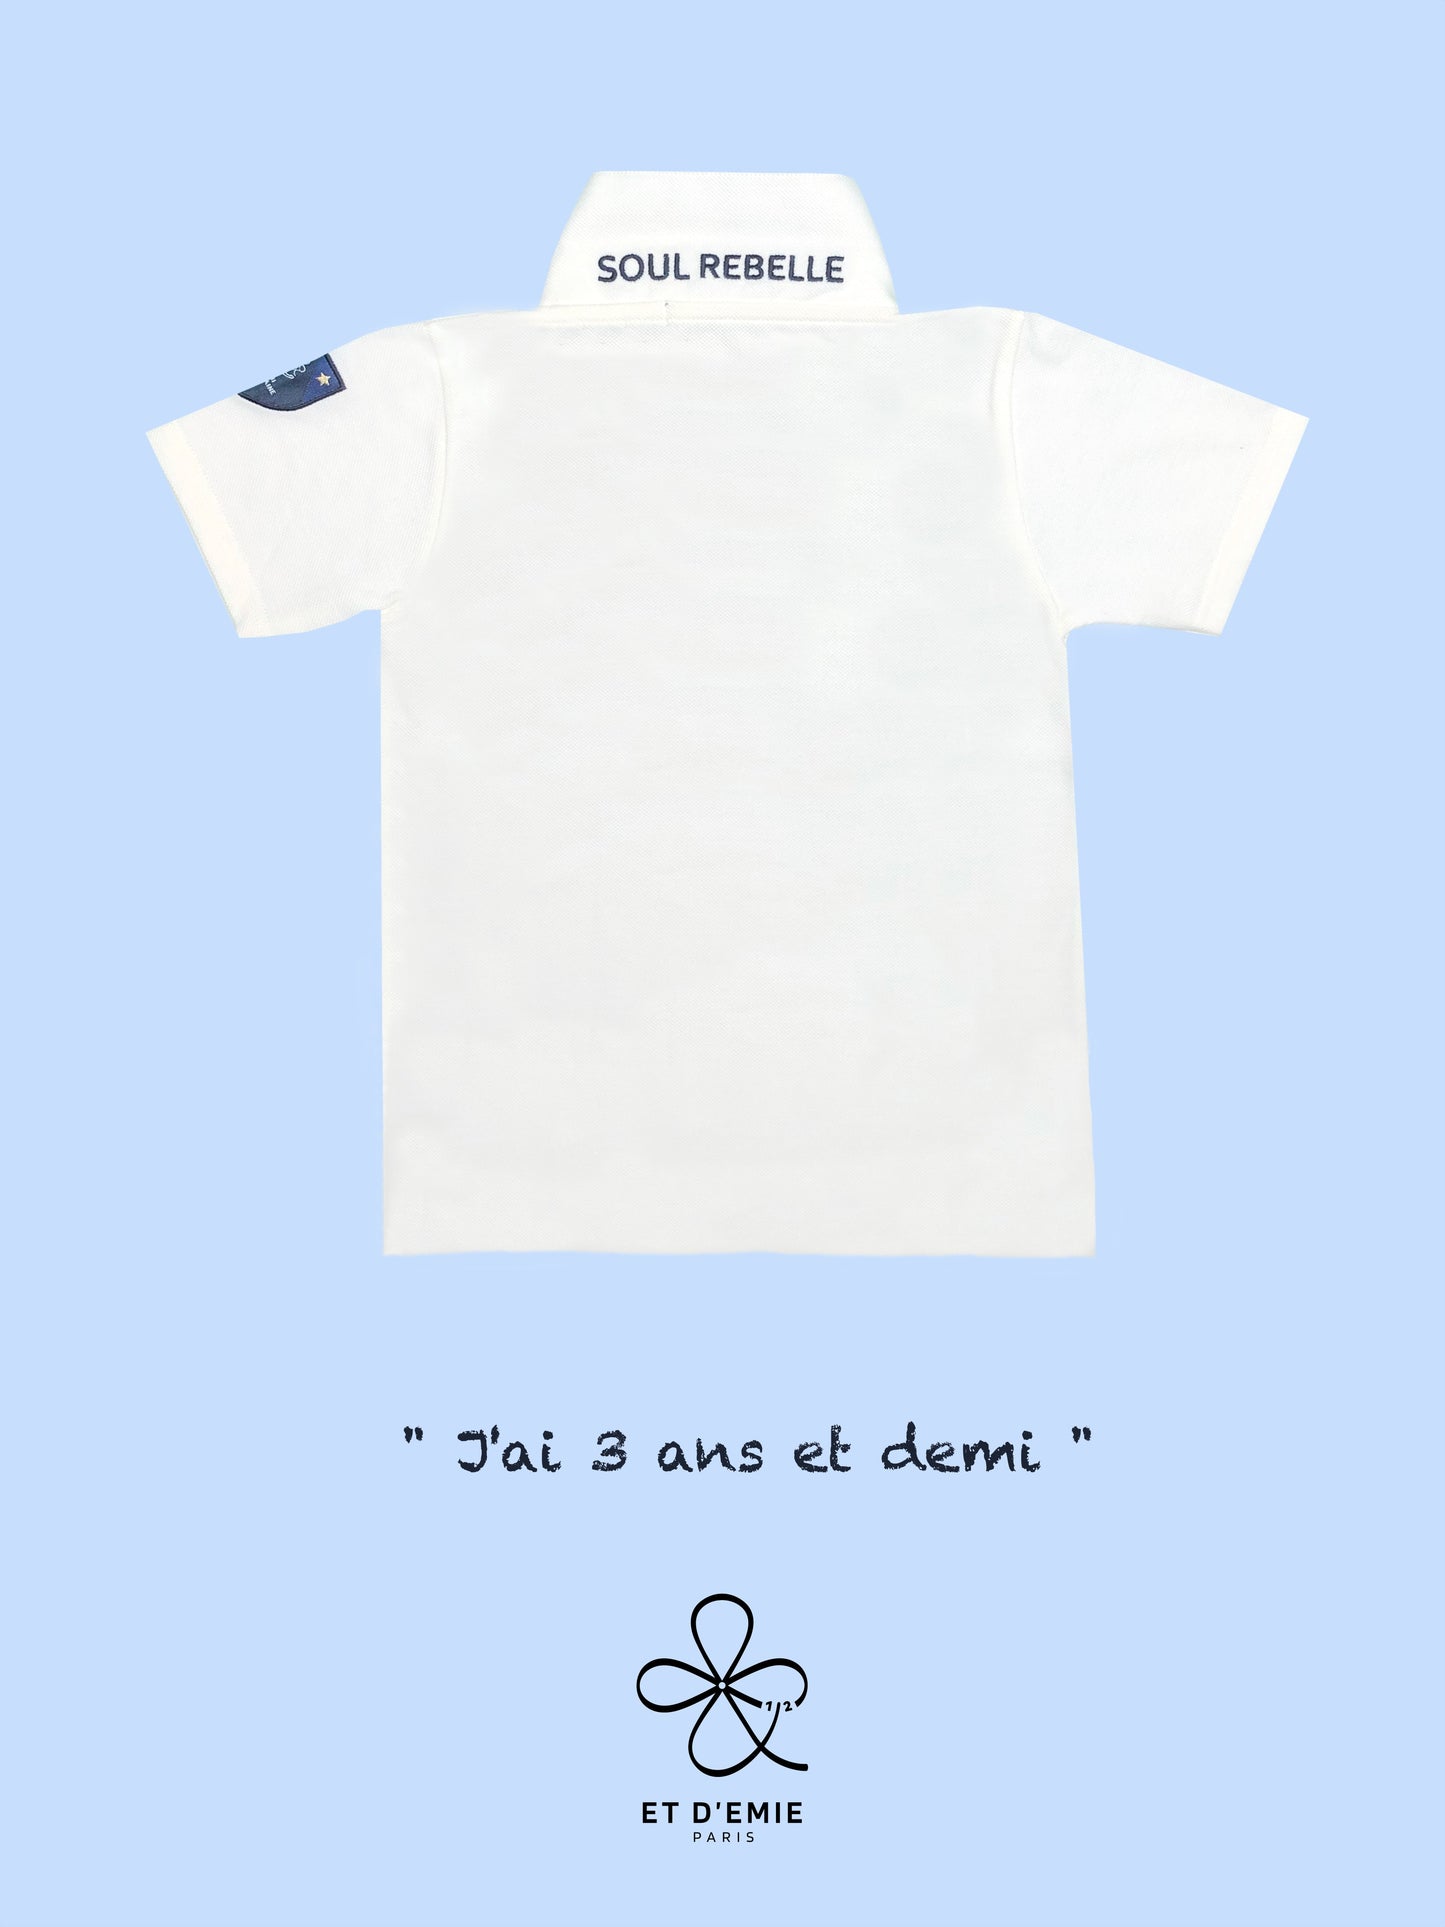 MINI CAPTAIN - SOUL REBELLE polo shirt "I'm 3 and a half years old" embroidered in ivory organic cotton pique🇫🇷